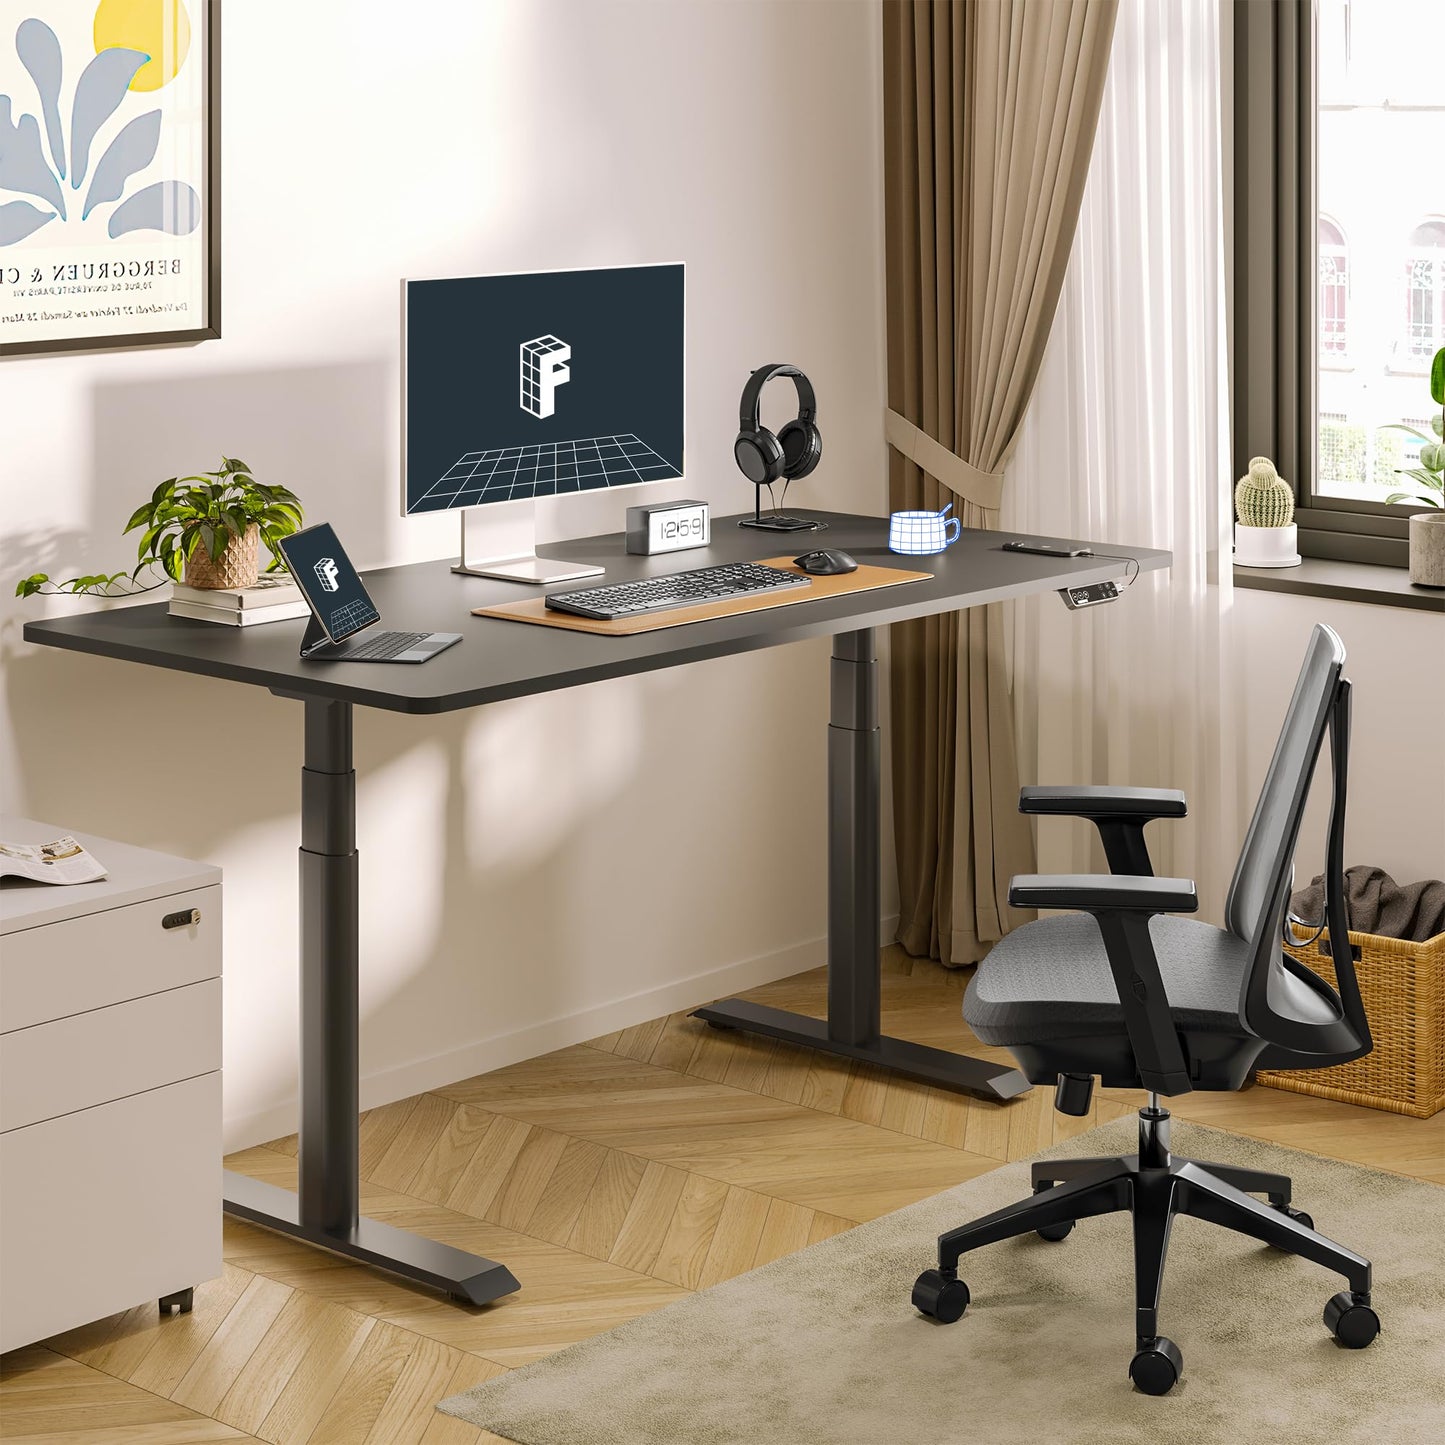 FLEXISPOT E8 Dual Motor 3 Stages Standing Desk 60x24 Inch Oval Leg Whole-Piece Board Electric Height Adjustable Desk Electric Stand Up Desk Sit Stand